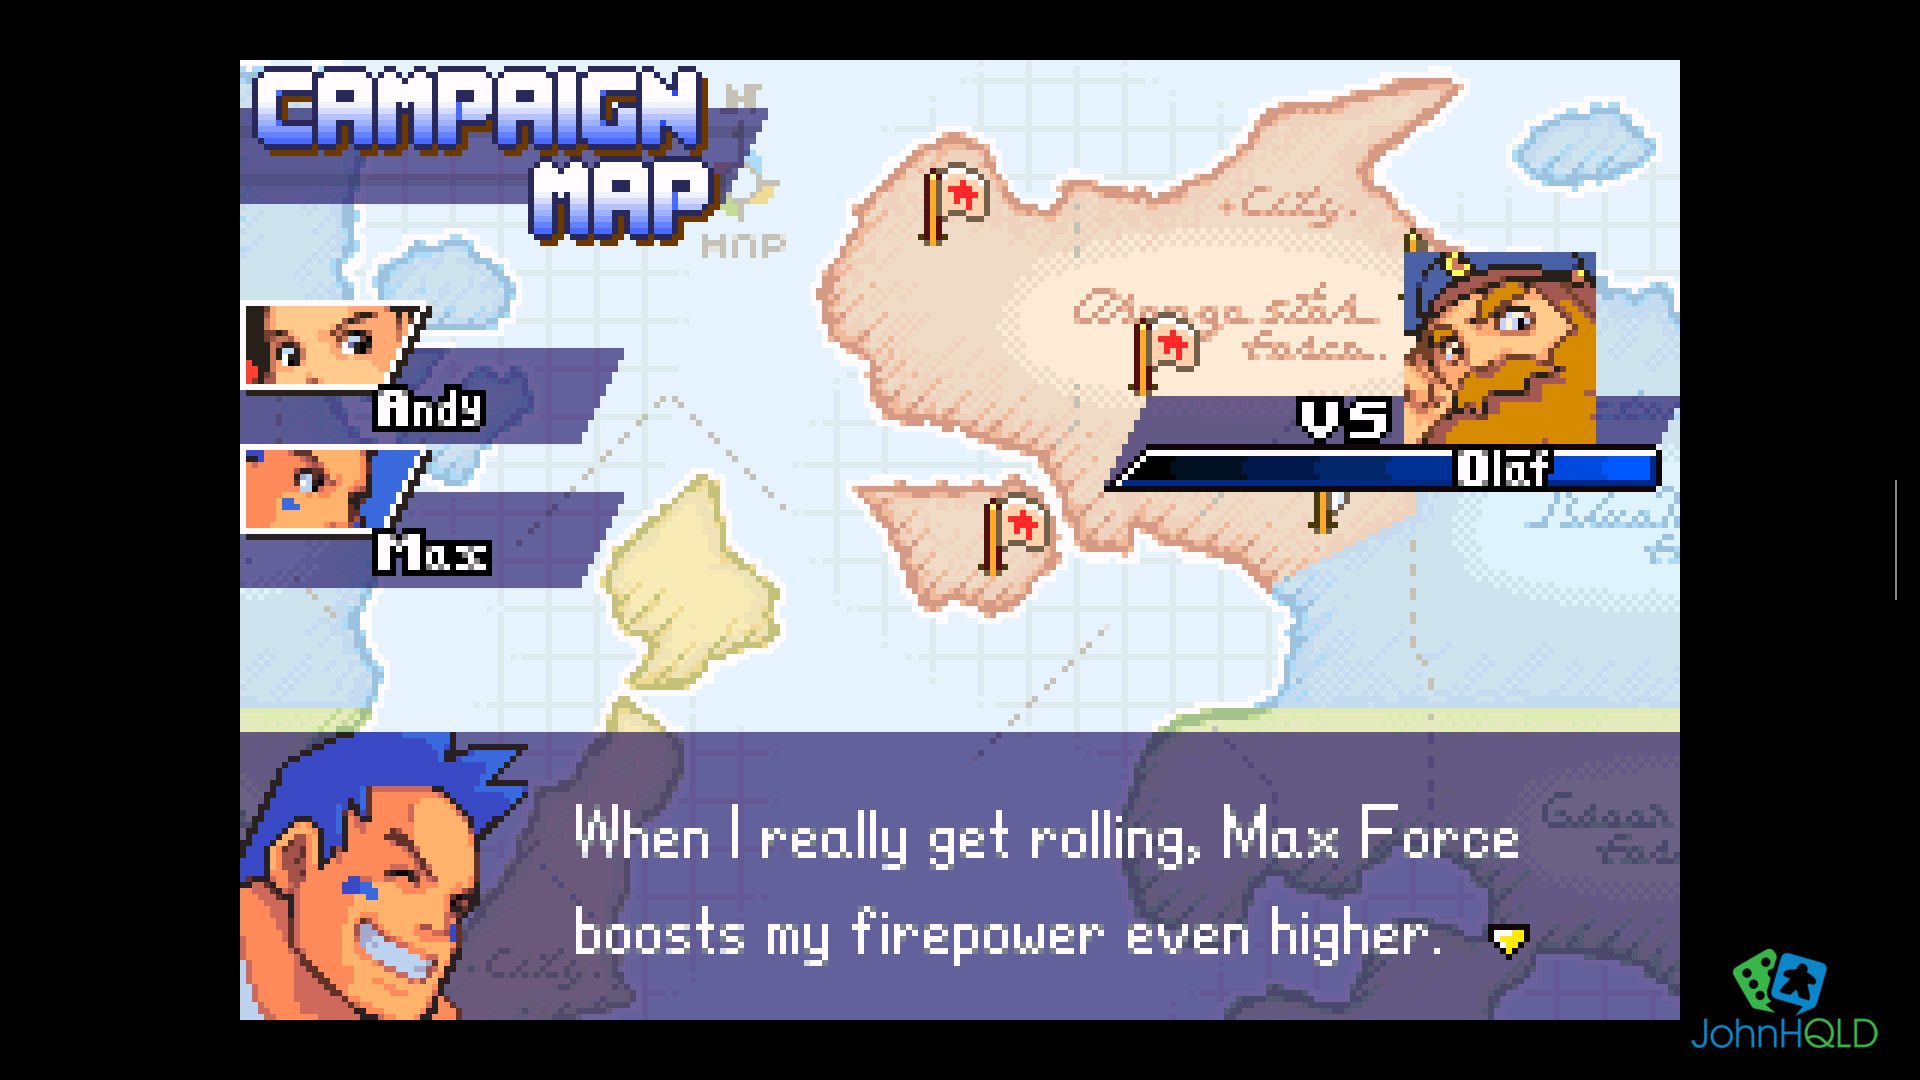 20220711 - Advance Wars - Adance Wars isnt a small experience its up there with the best strategy campaigns of all time